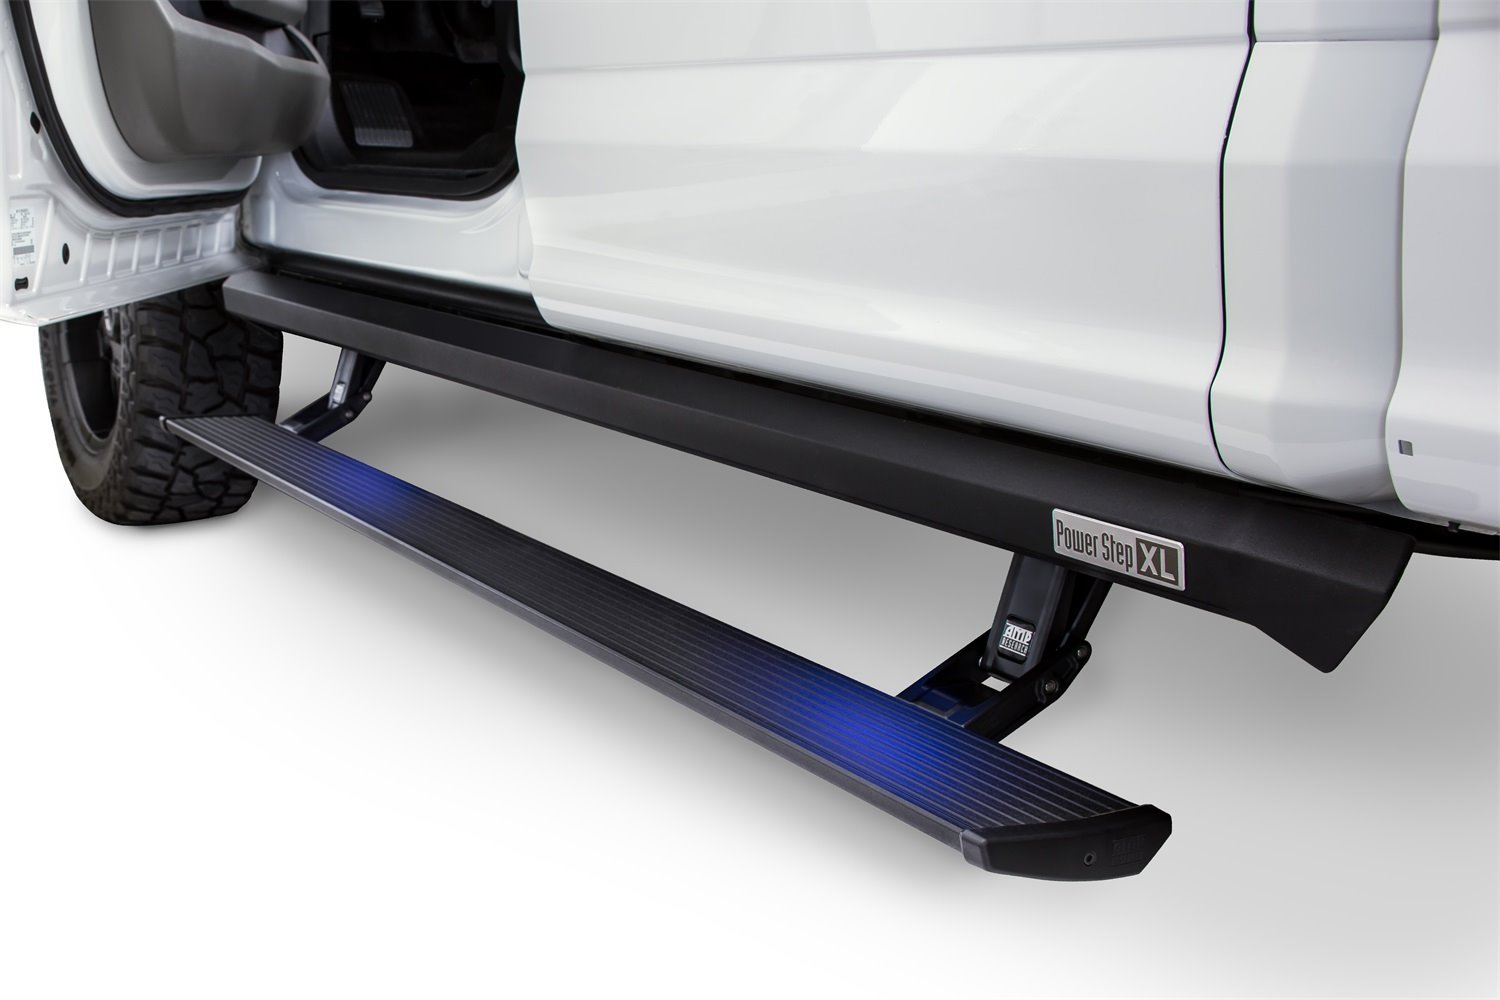 77236-01A PowerStep XL Electric Running Boards, 3 in. Drop, 20-21 Ford F-Series Crew Cab; 2022 Ford F-Series XL/XLT Crew Cab